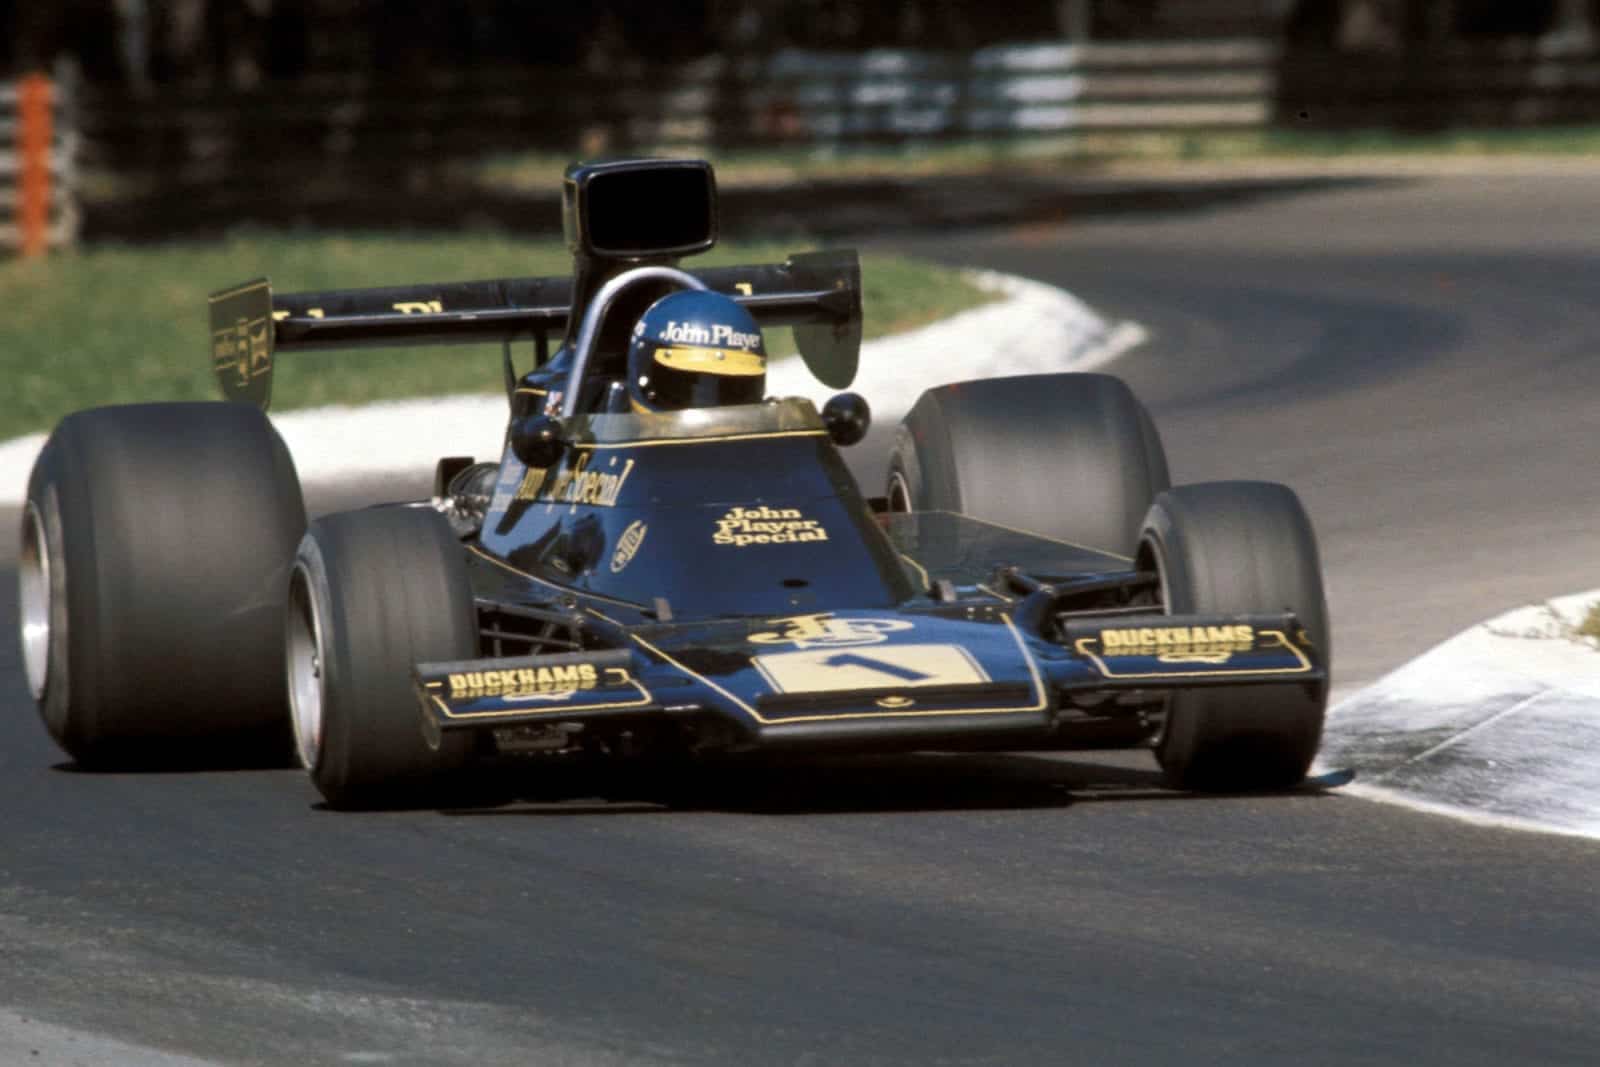 Ronnie Peterson driving for Lotus at the 1974 Italian Grand Prix.